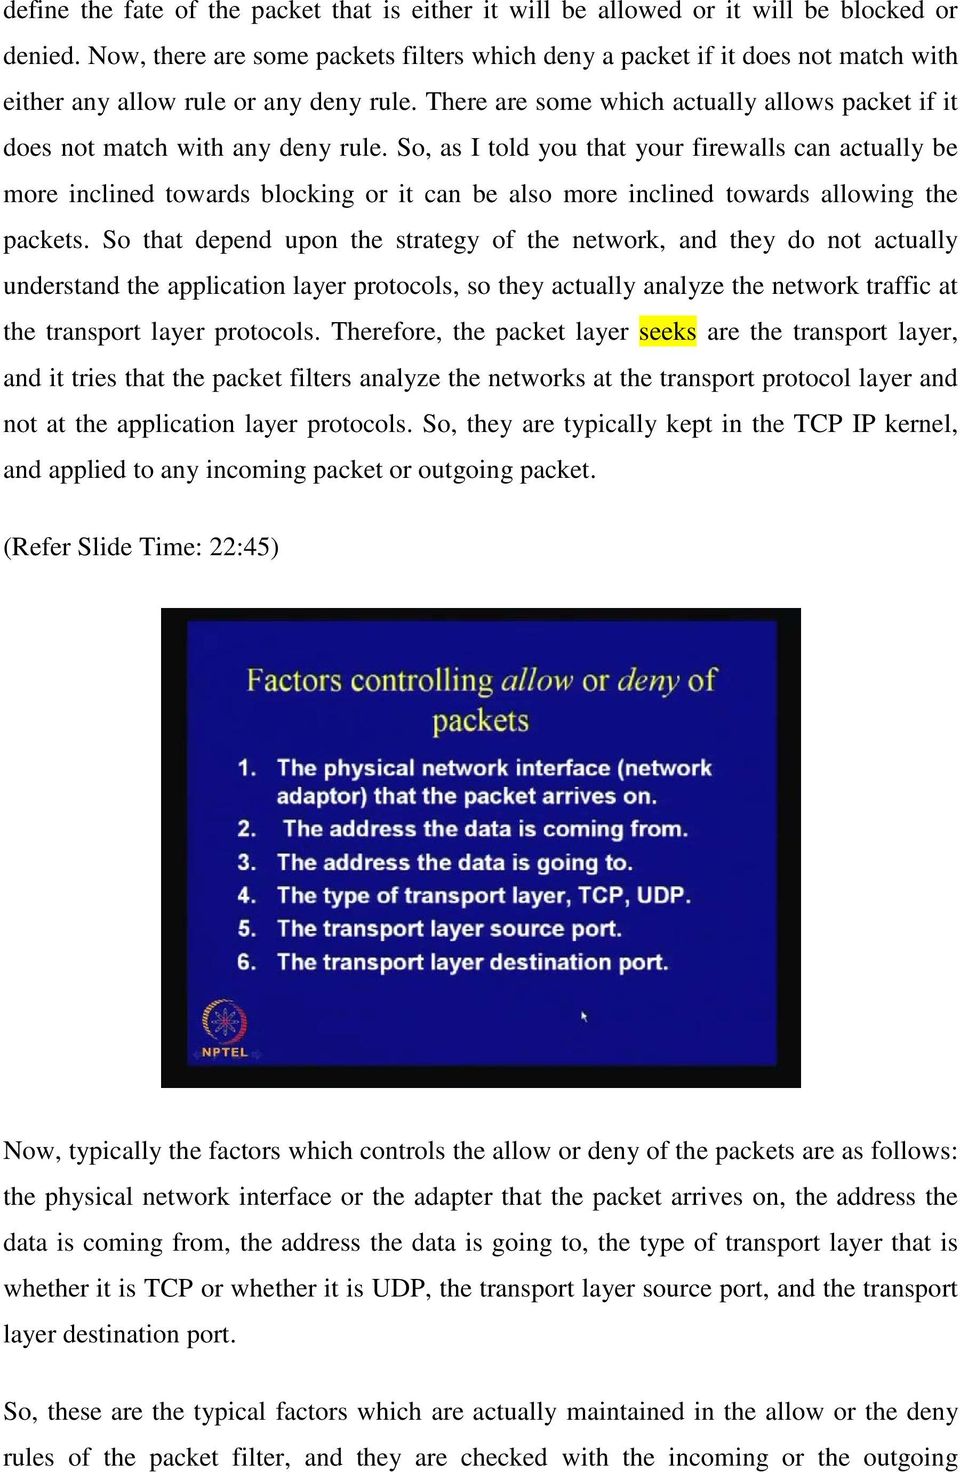 There are some which actually allows packet if it does not match with any deny rule.